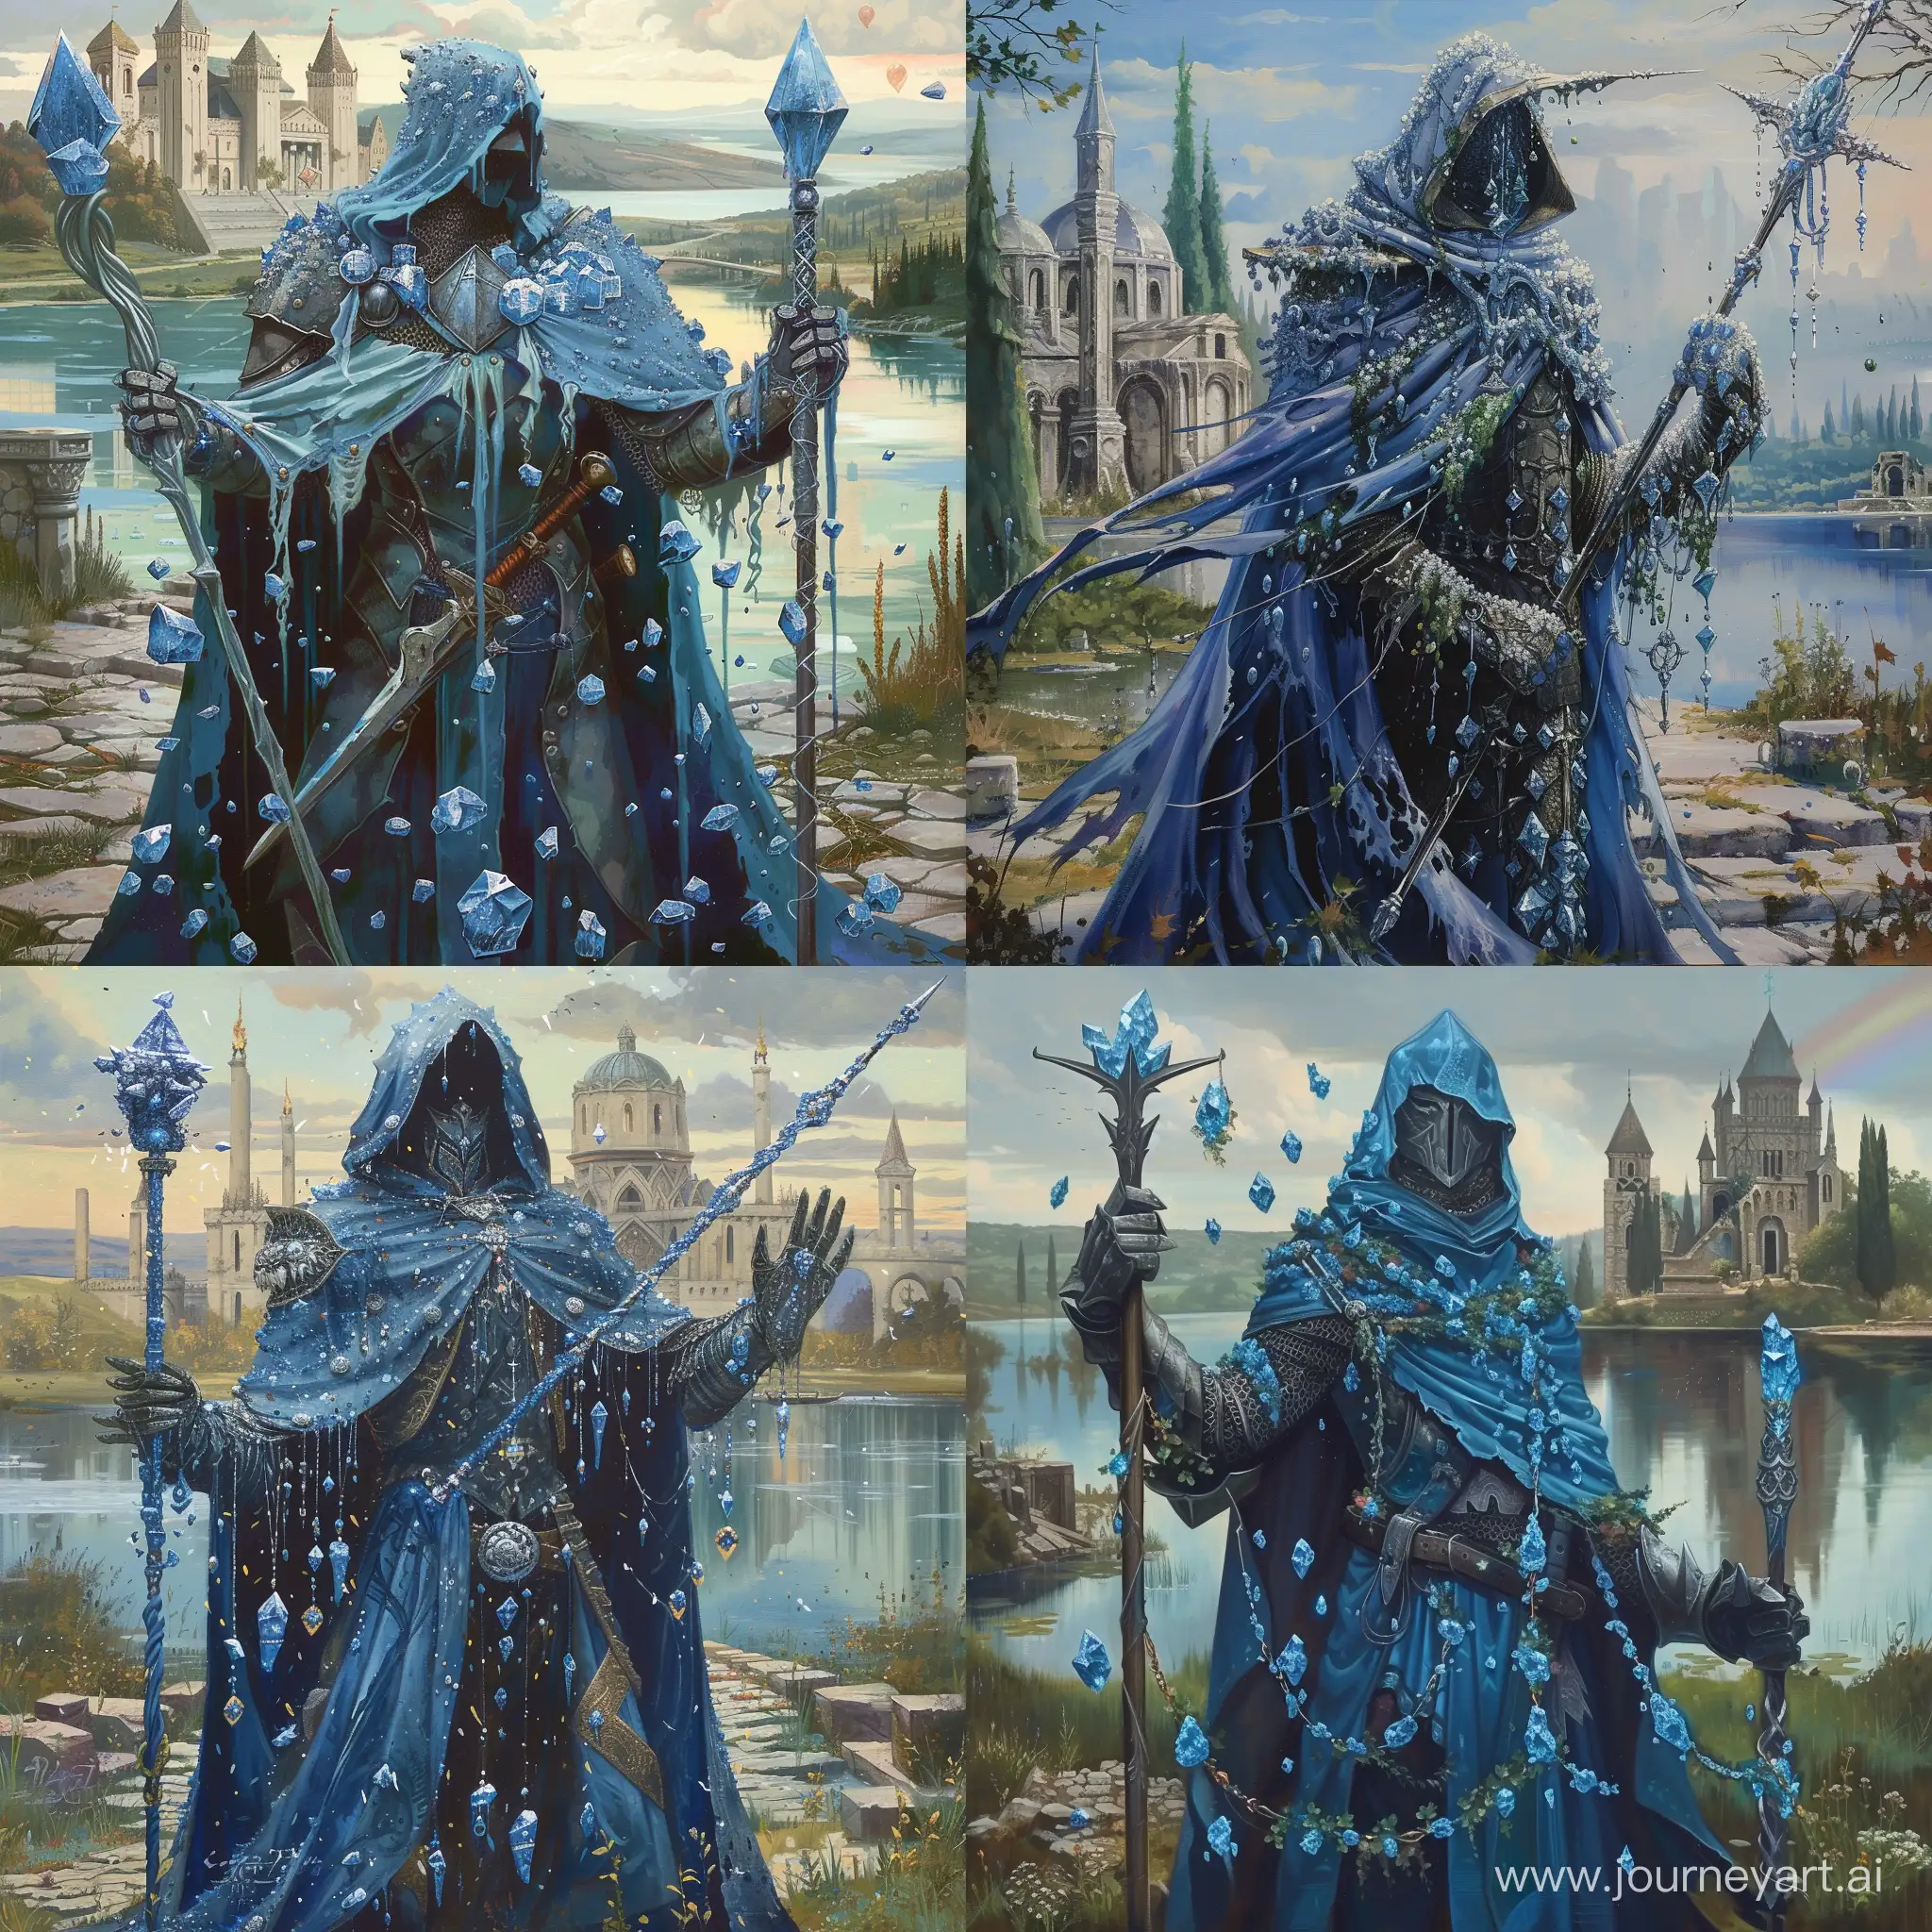 illustration, art, fantasy, a knight magician with a staff and a sword in different hands, the painting is made in a traditional style, calm colors, the cloak of the knight magician is made in blue oil colors, calm style, the academy surrounded by a lake is depicted on the background, there are ruins near the knight, there are magic crystals on the sword, the knight himself is a little overgrown with magic crystals, instead of a hood, a knight may have a knight's helmet with inlaid magic crystals